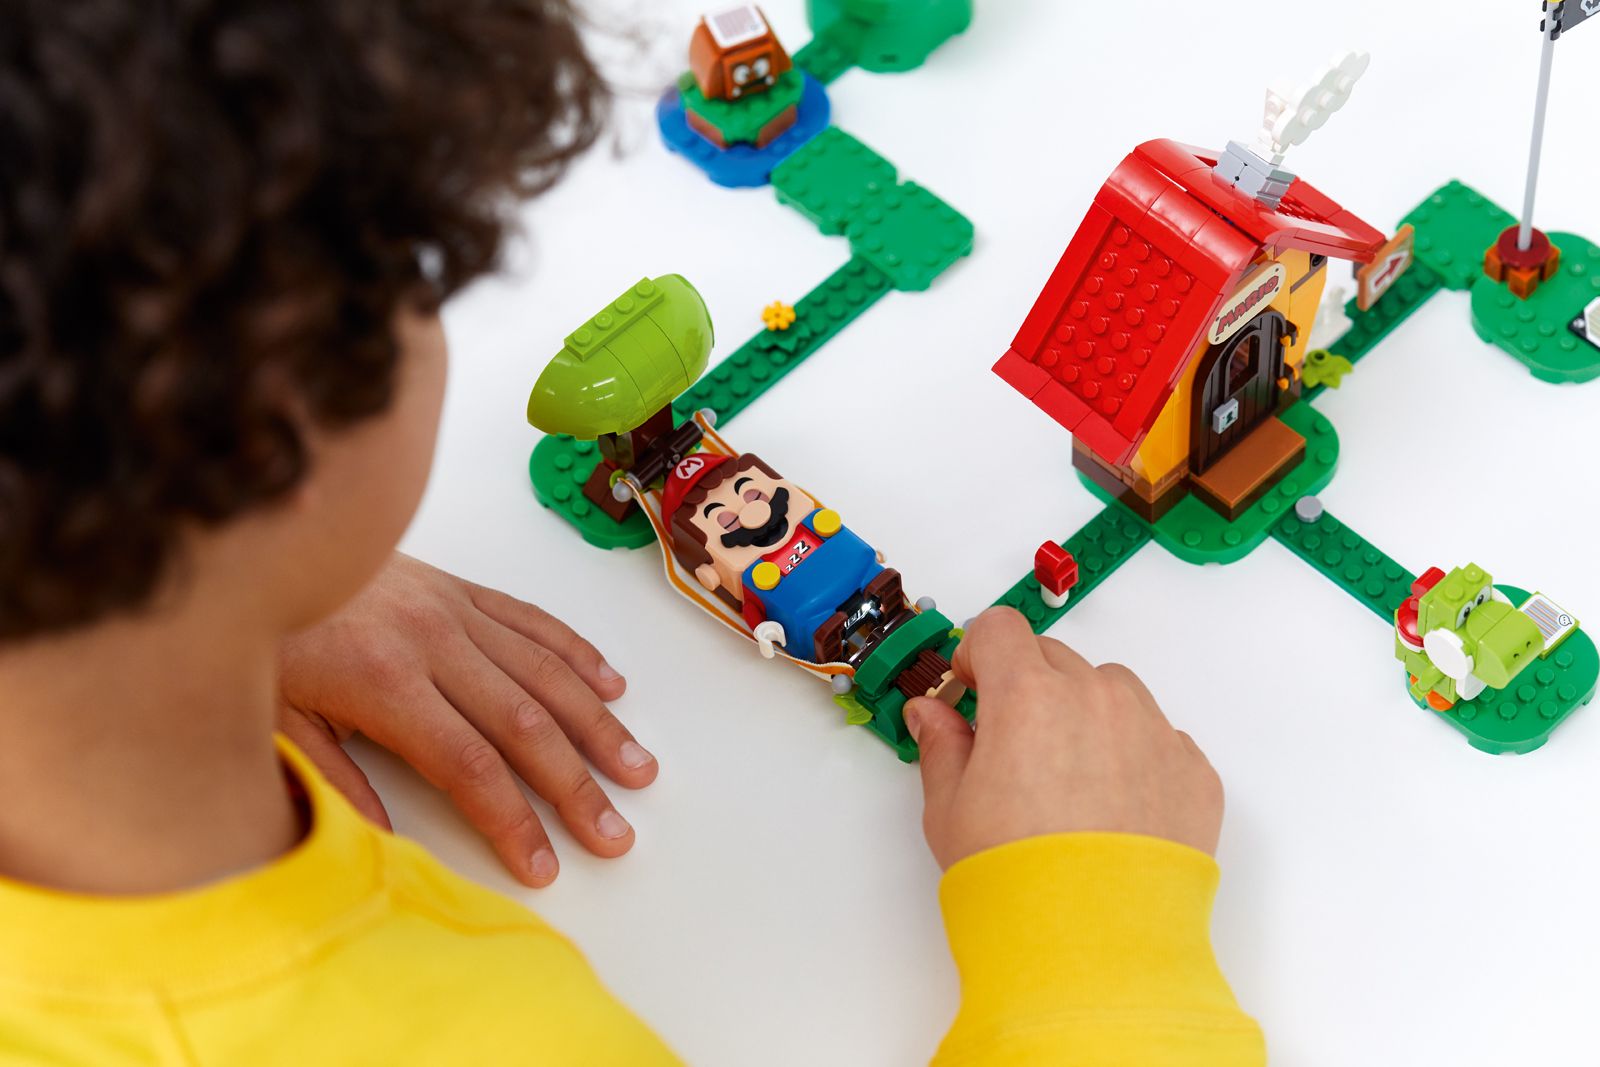 First Super Mario Lego Sets Detailed - Including How Mario Interacts With The Bricks image 1